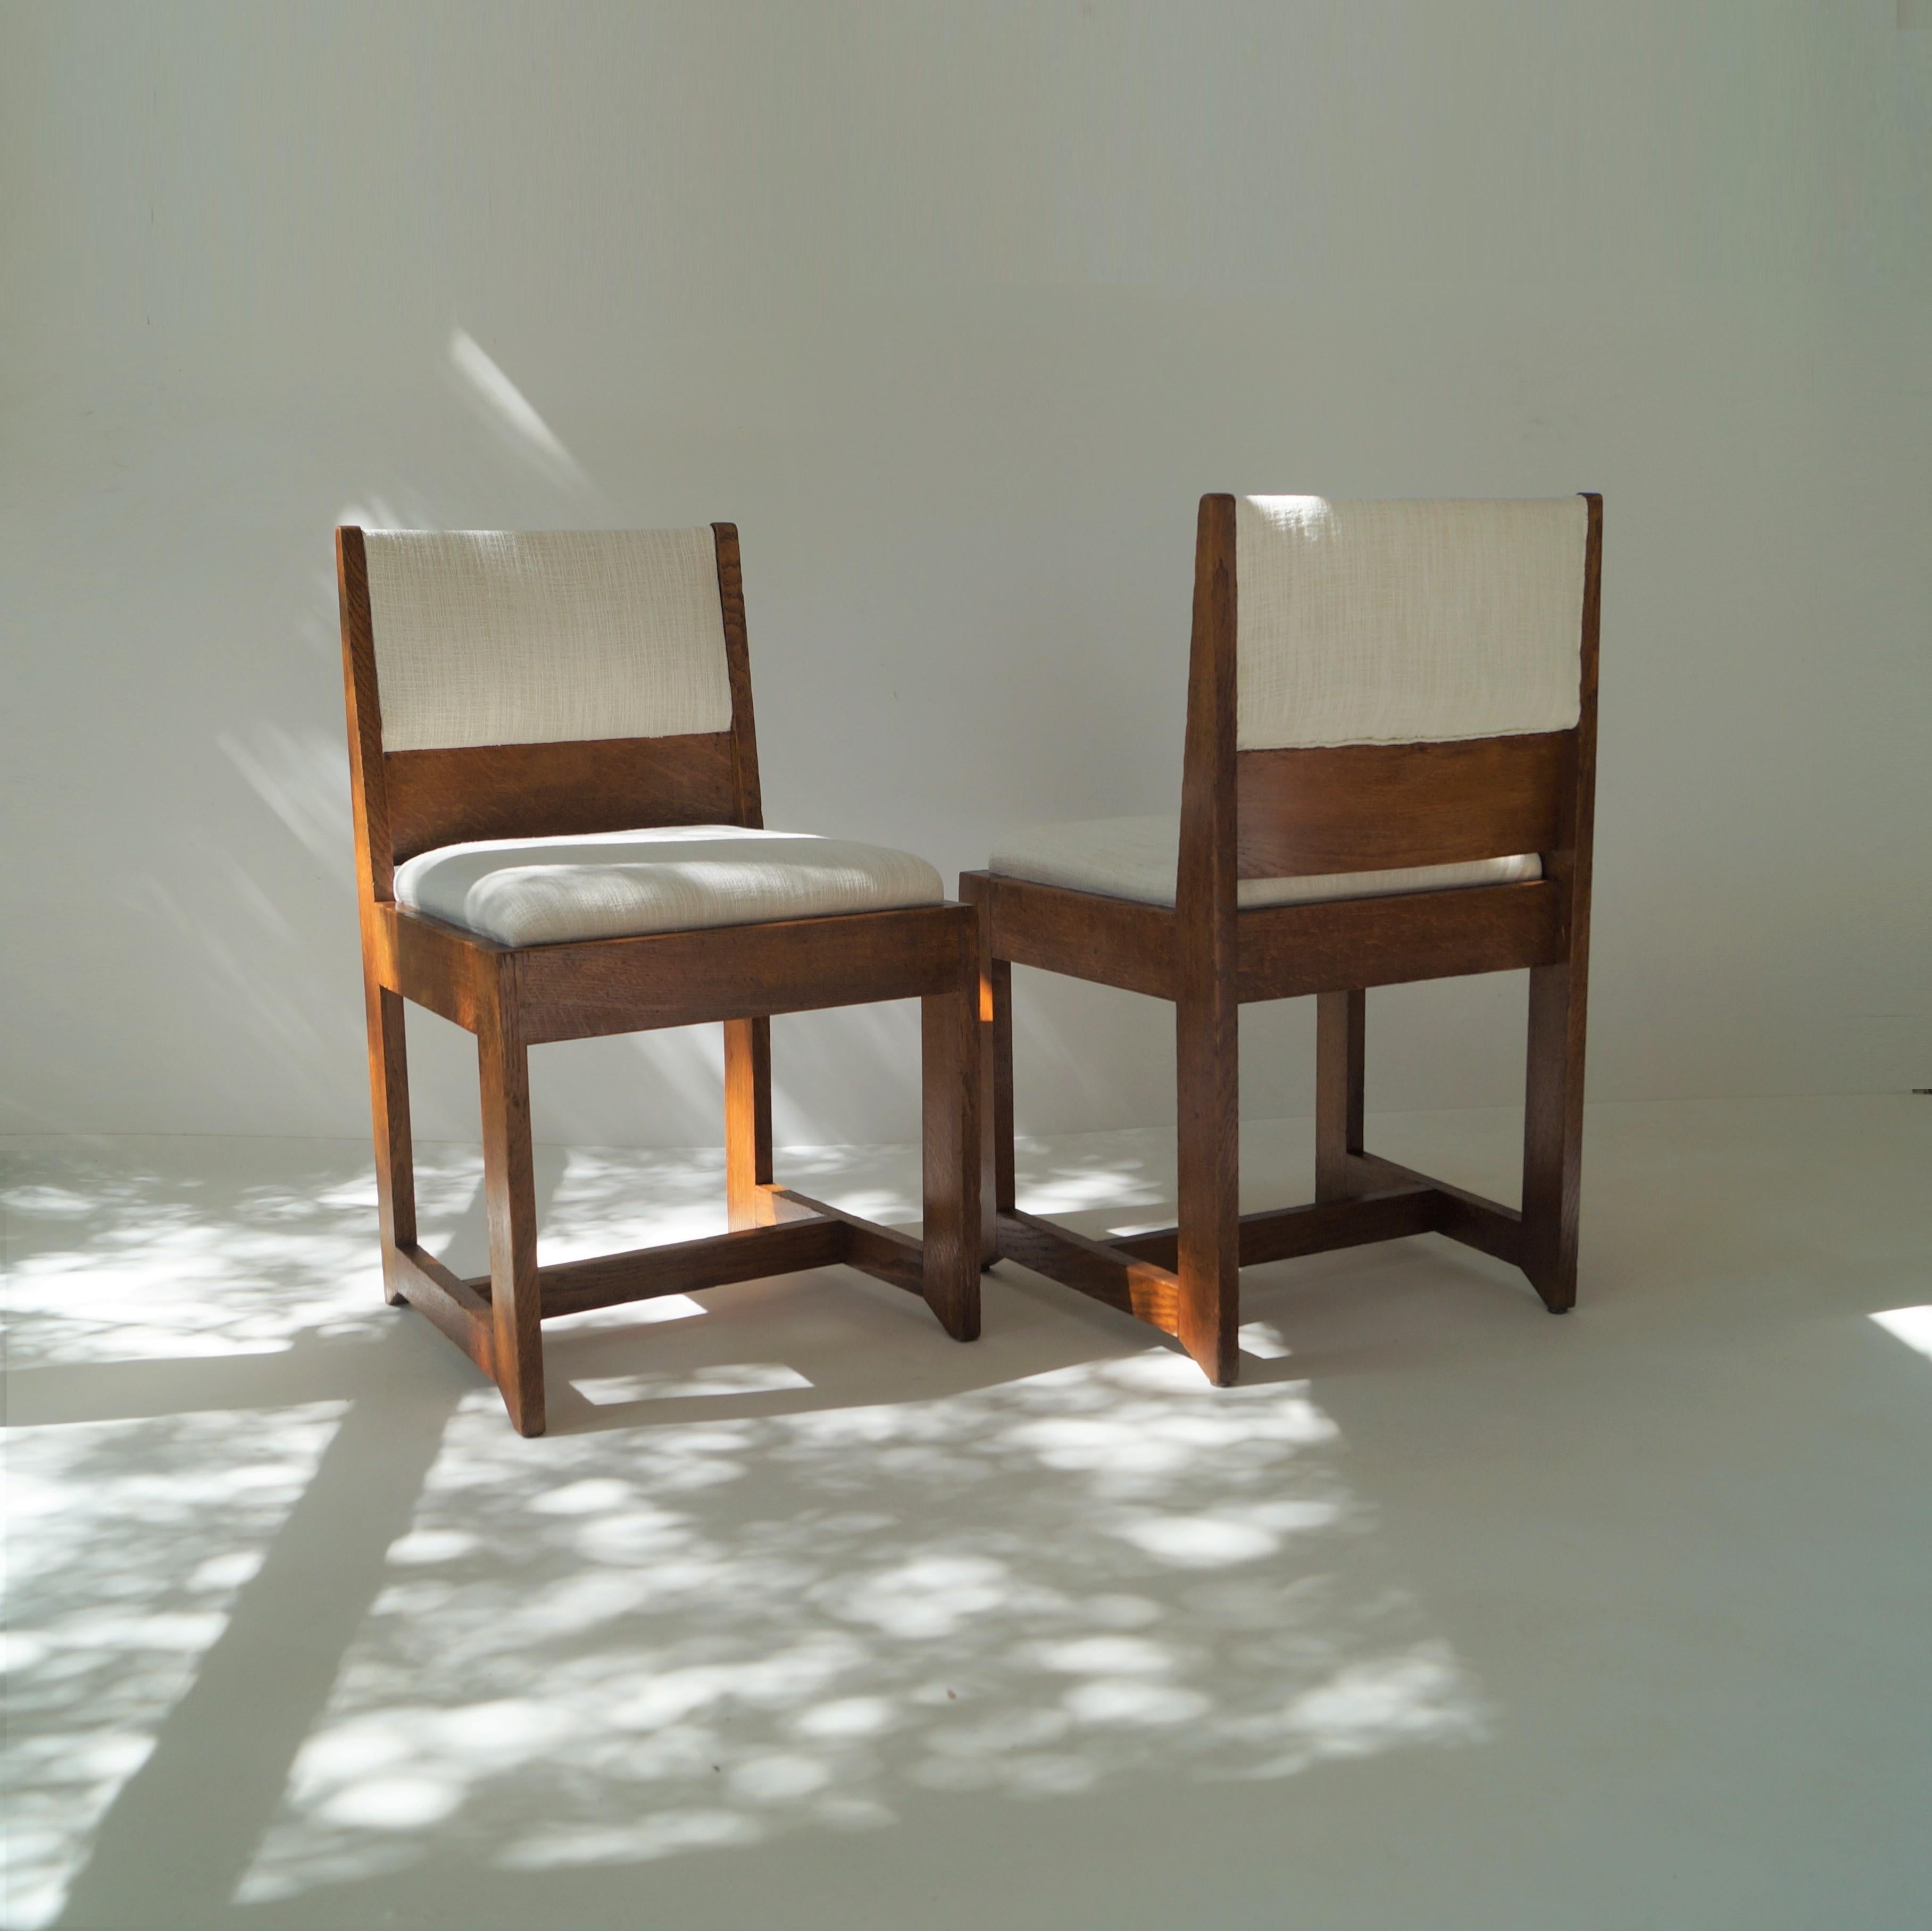 Dutch Art Deco Modernist set of chairs by H. Wouda for Pander, 1924 For Sale 10